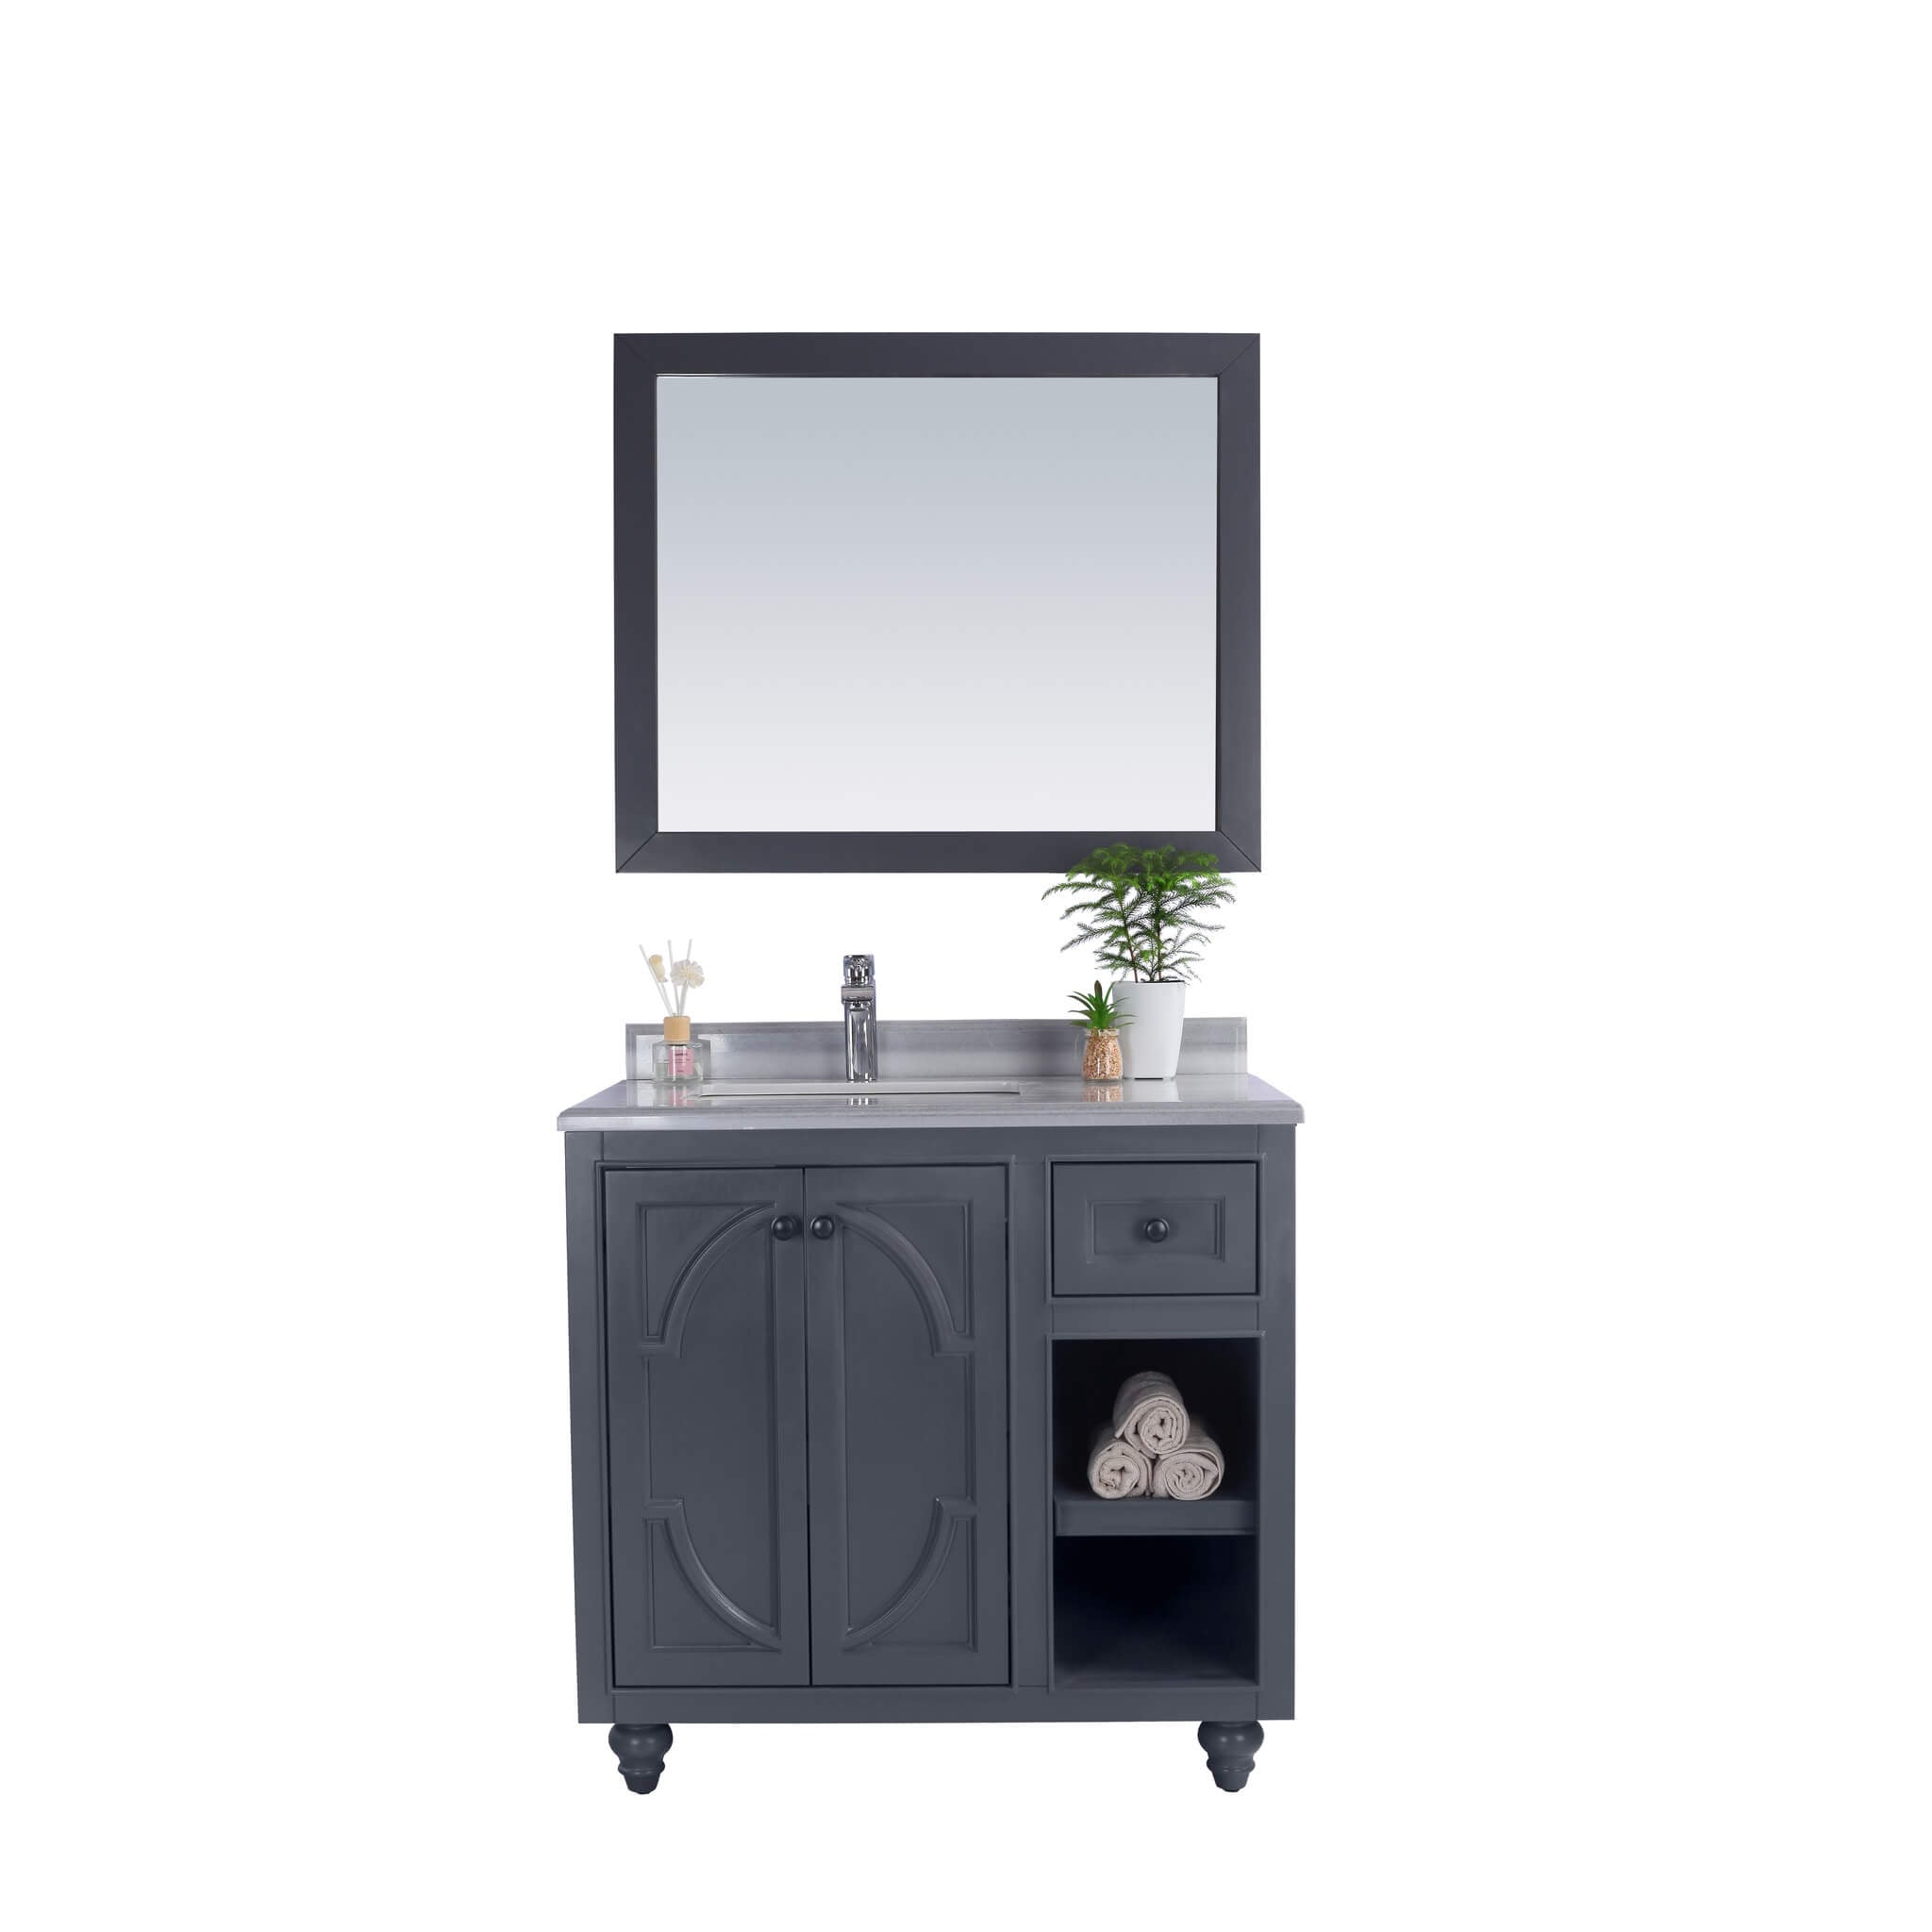 LAVIVA Odyssey 313613-36G-WS 36" Single Bathroom Vanity in Maple Grey with White Stripes Marble, White Rectangle Sink, Front View